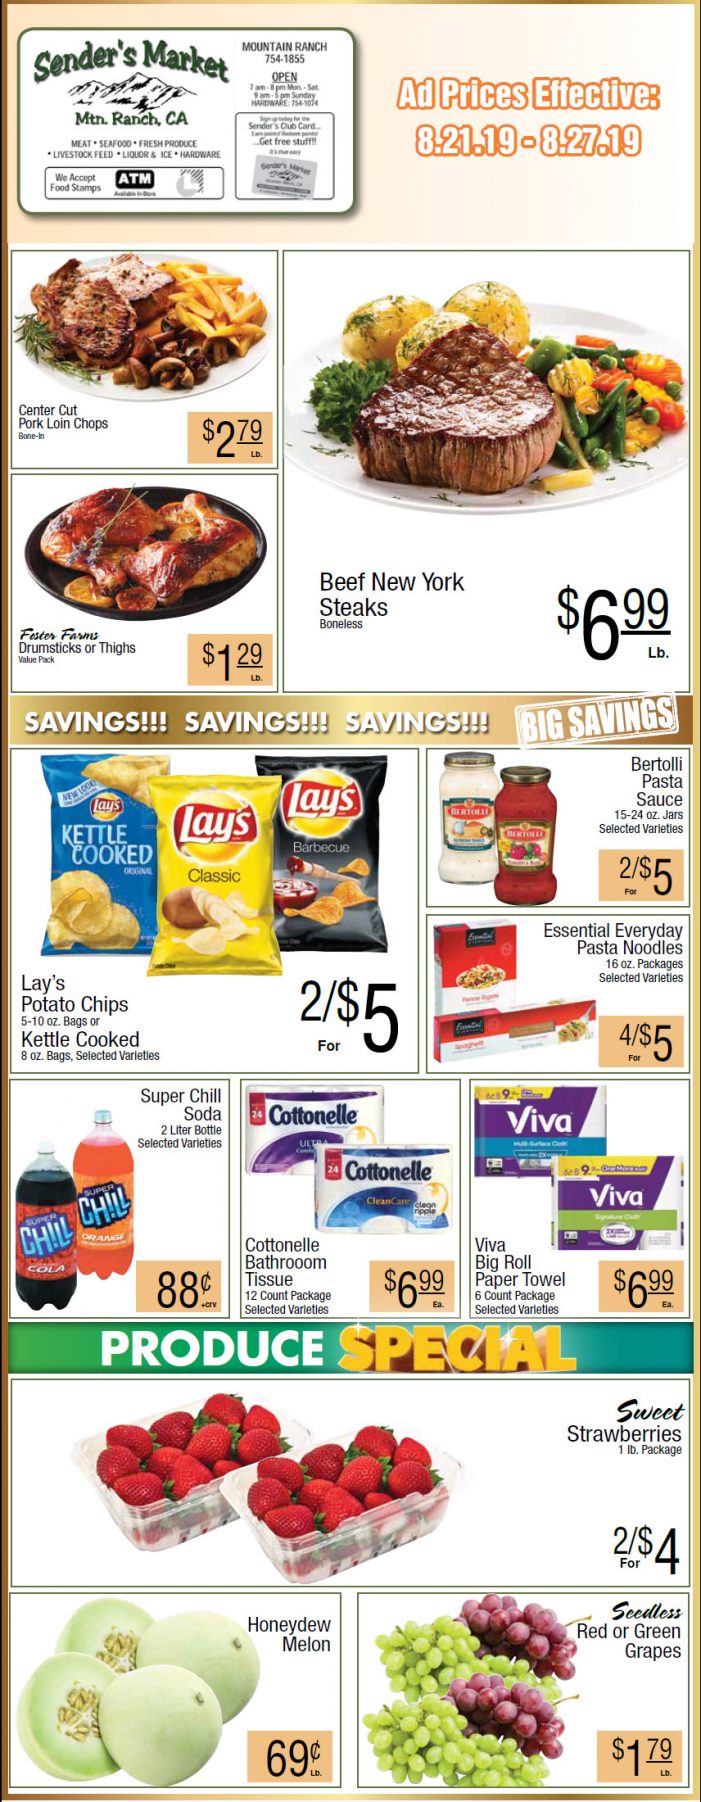 Sender’s Market Weekly Ad & Grocery Specials Through August 27th